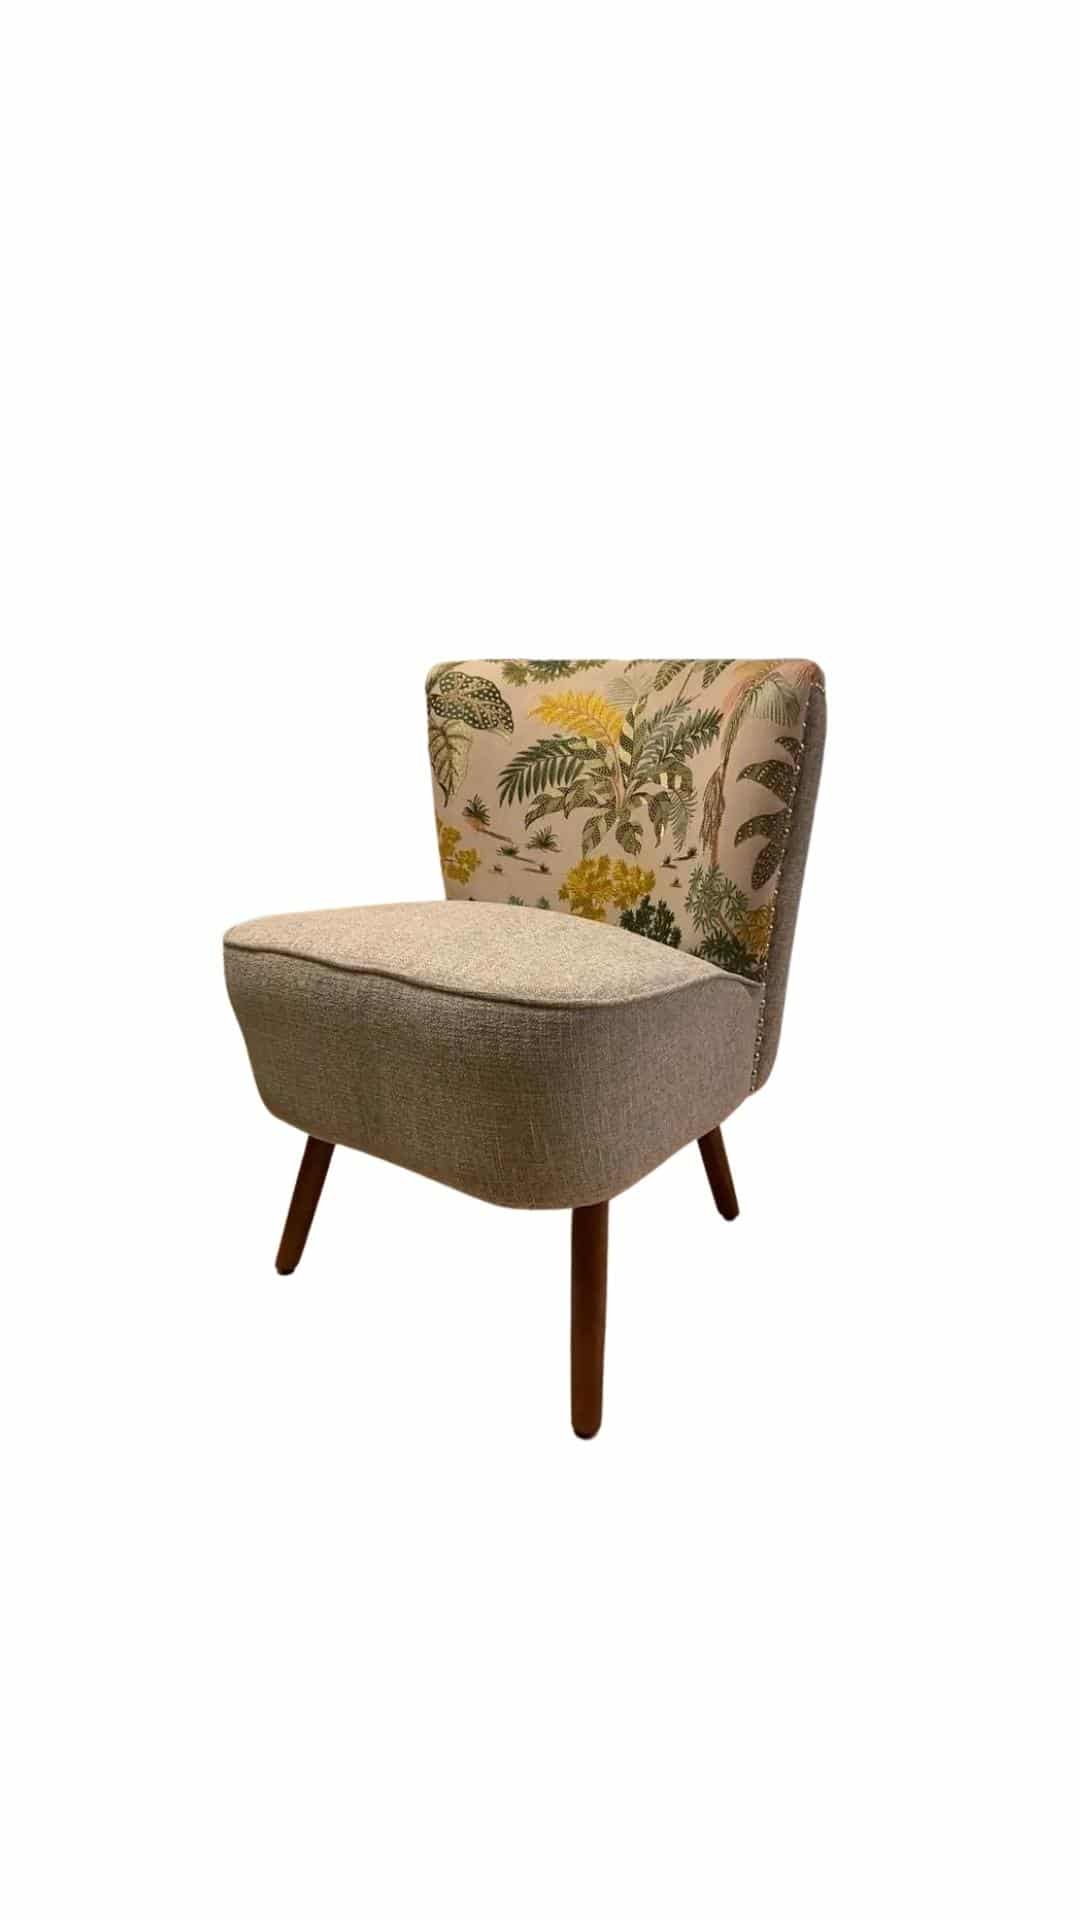 70’s Chair Floral